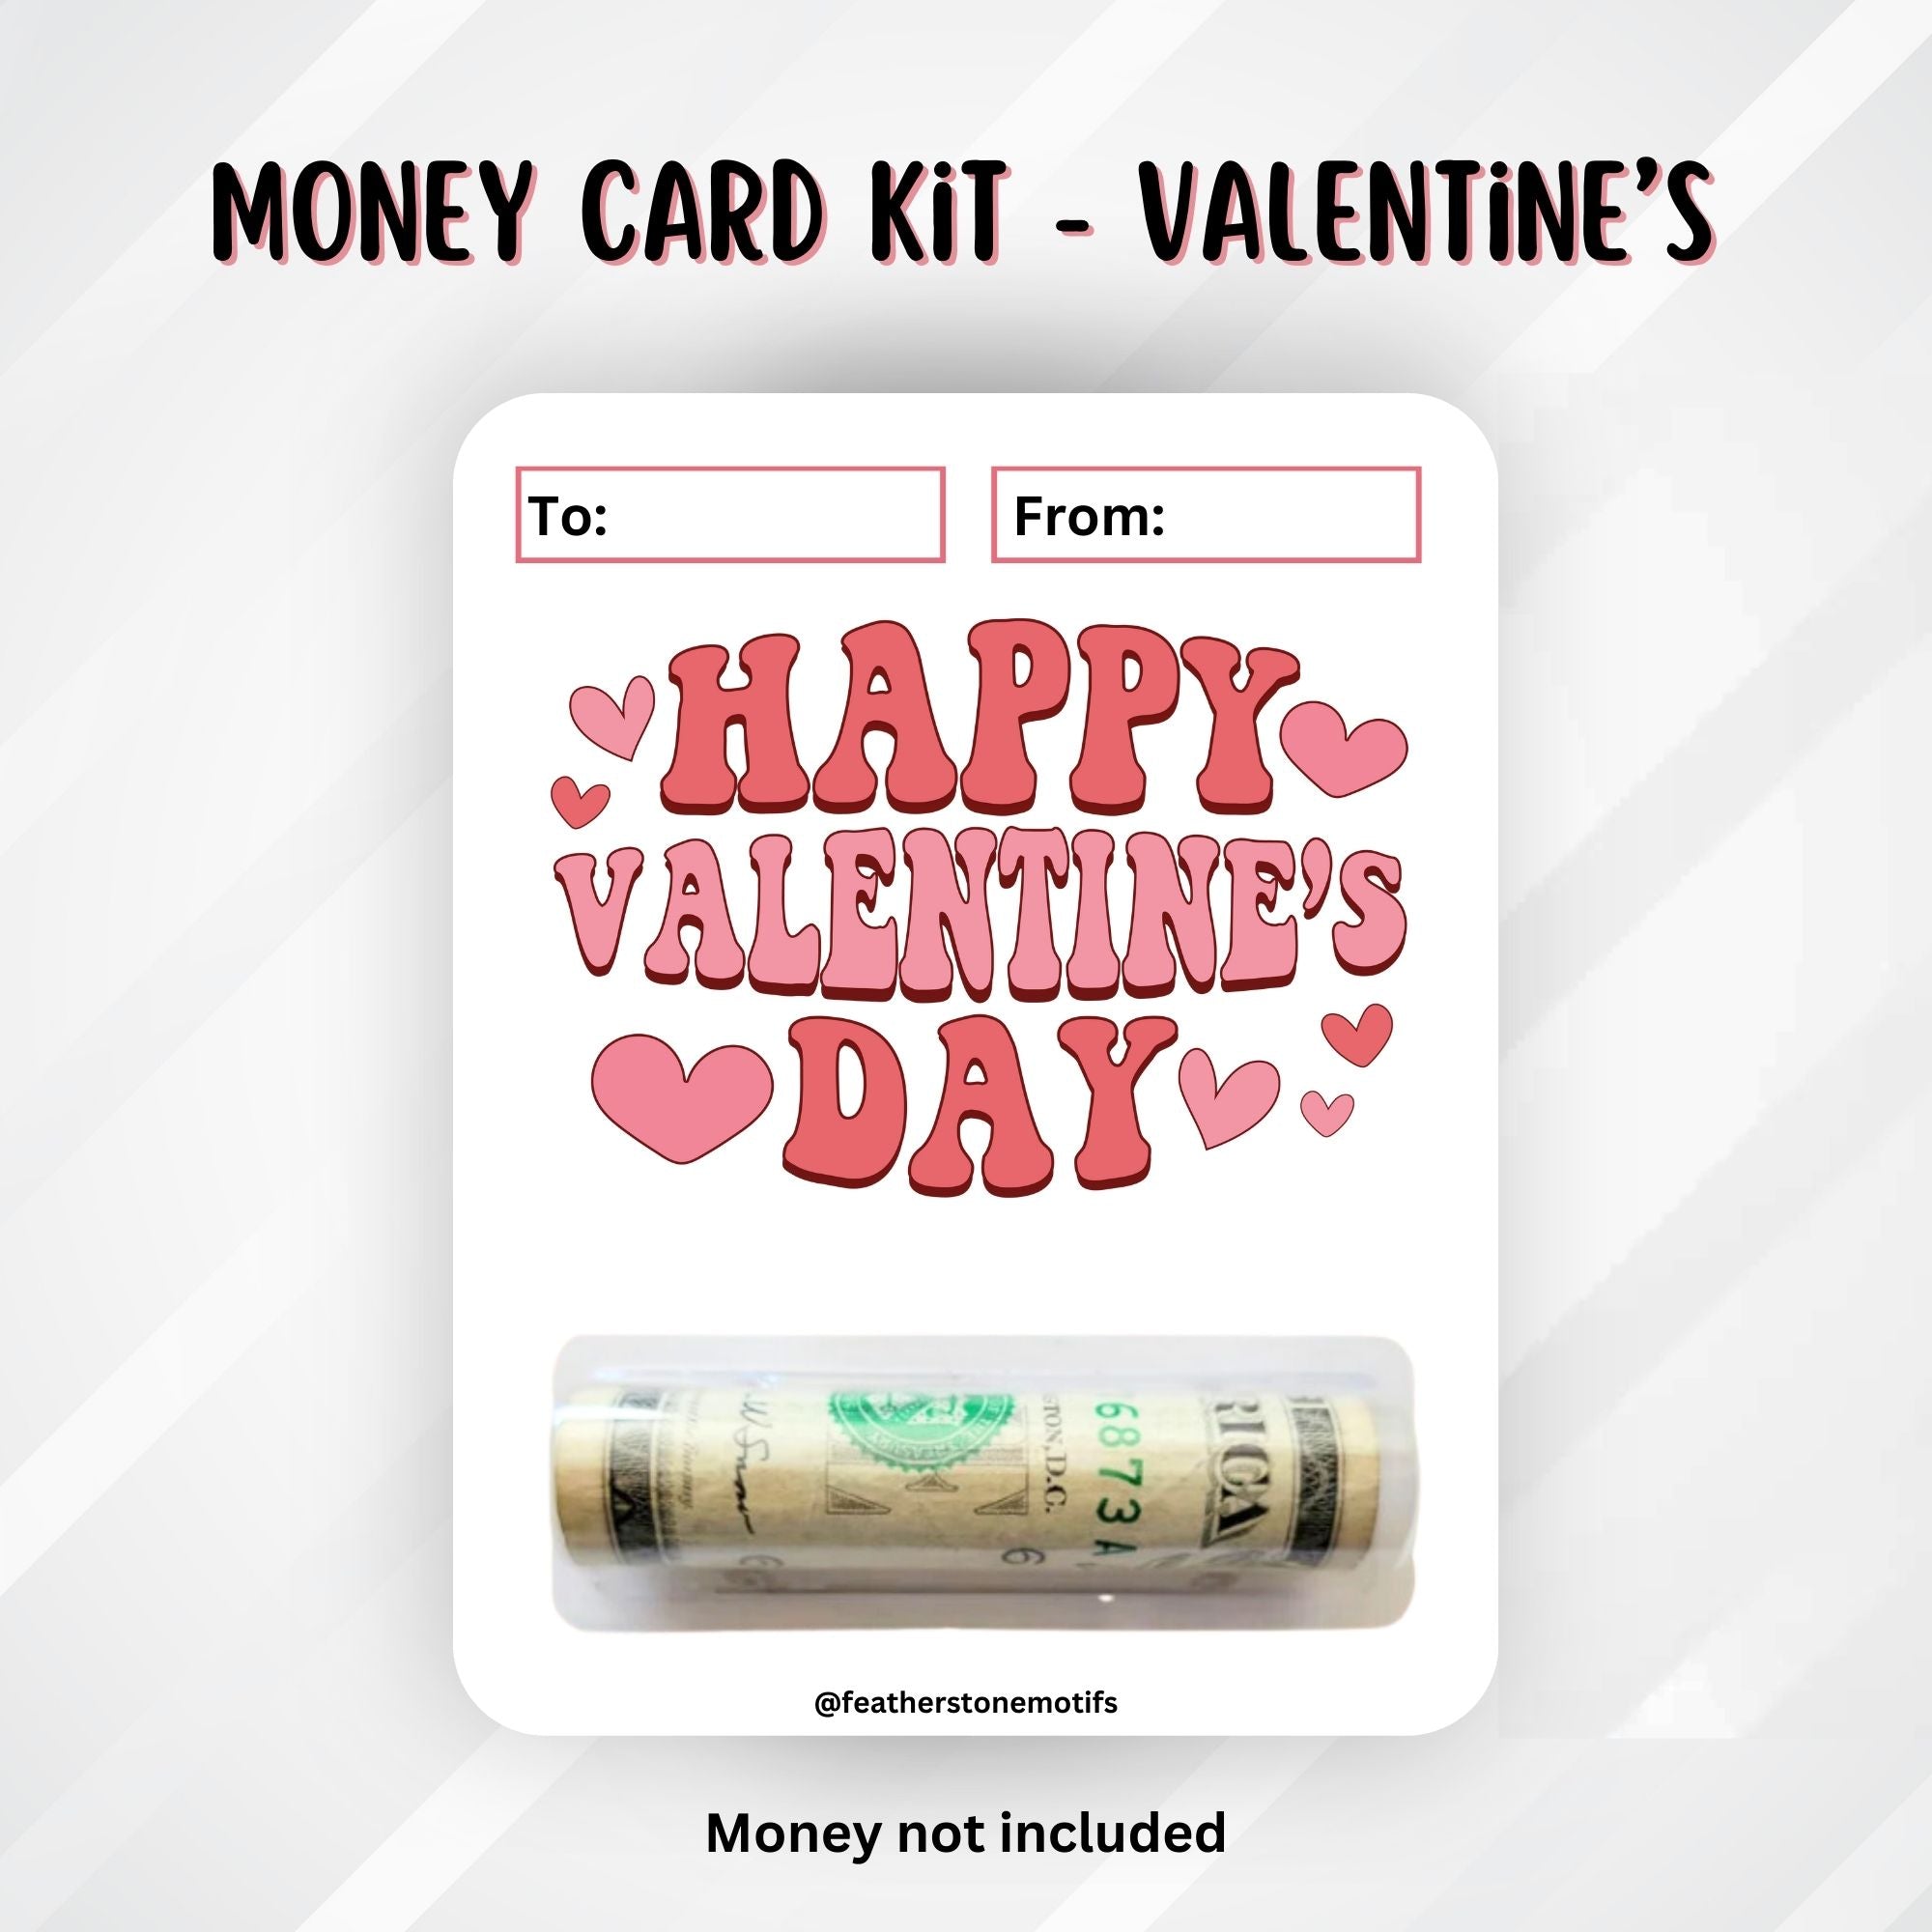 This image shows the money tube attached to the Happy Valentine's Day Valentine Money Card.